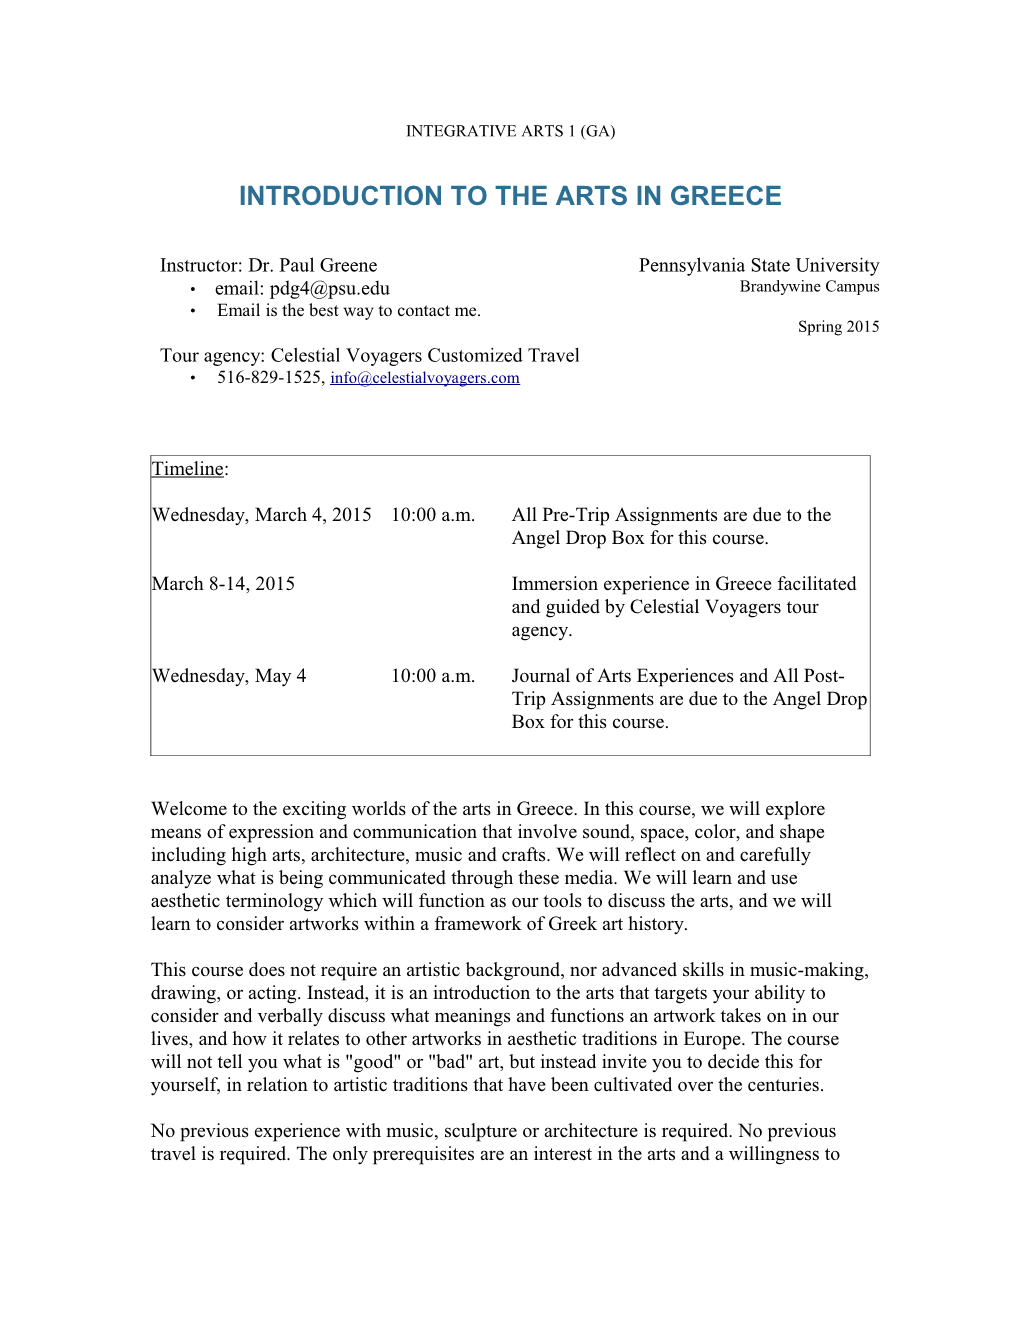 Introduction to the Arts in Greece